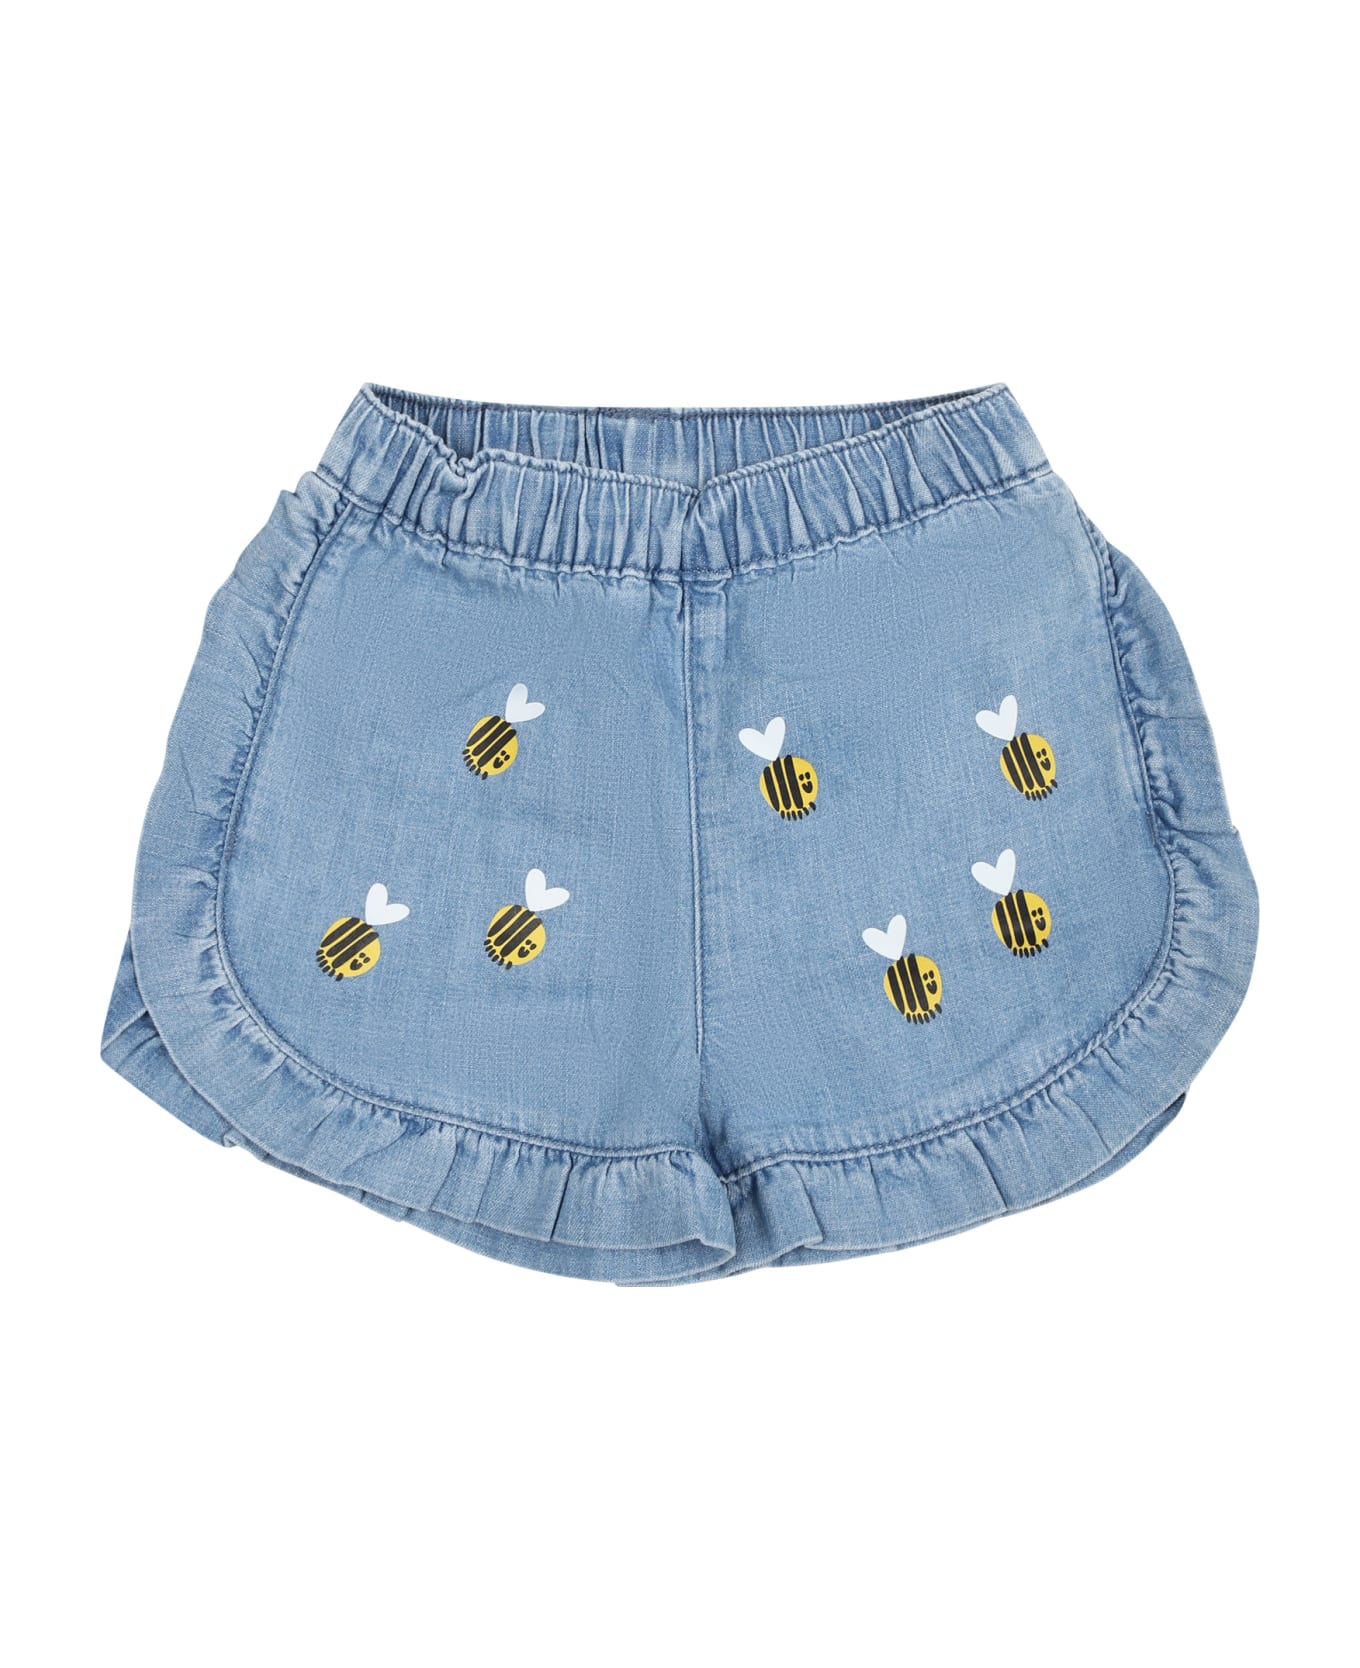 Stella McCartney Kids Blue Shorts For Baby Girl With Beees - Denim ボトムス